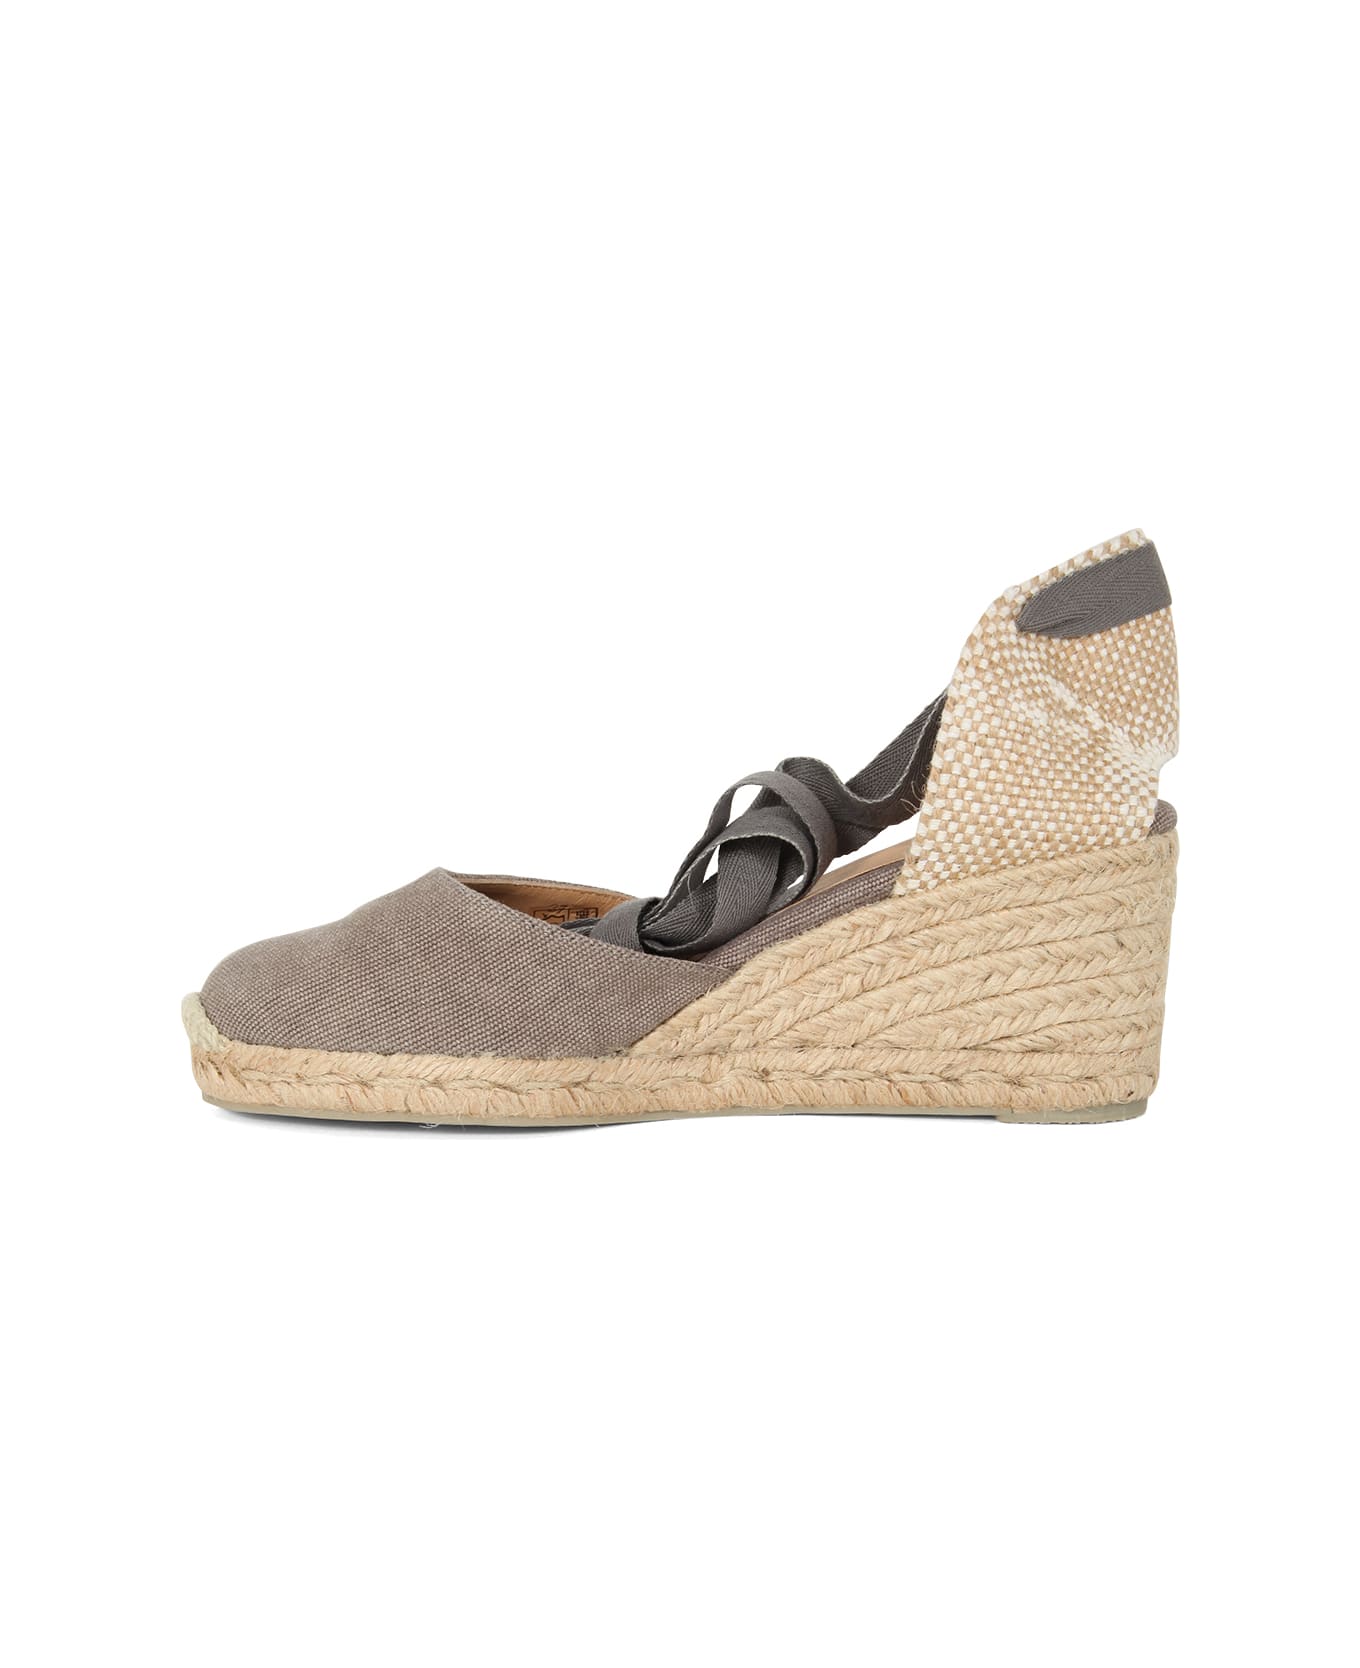 Castañer Carina Espadrilles Wedge Sandal With Ankle Laces - Lead Grey